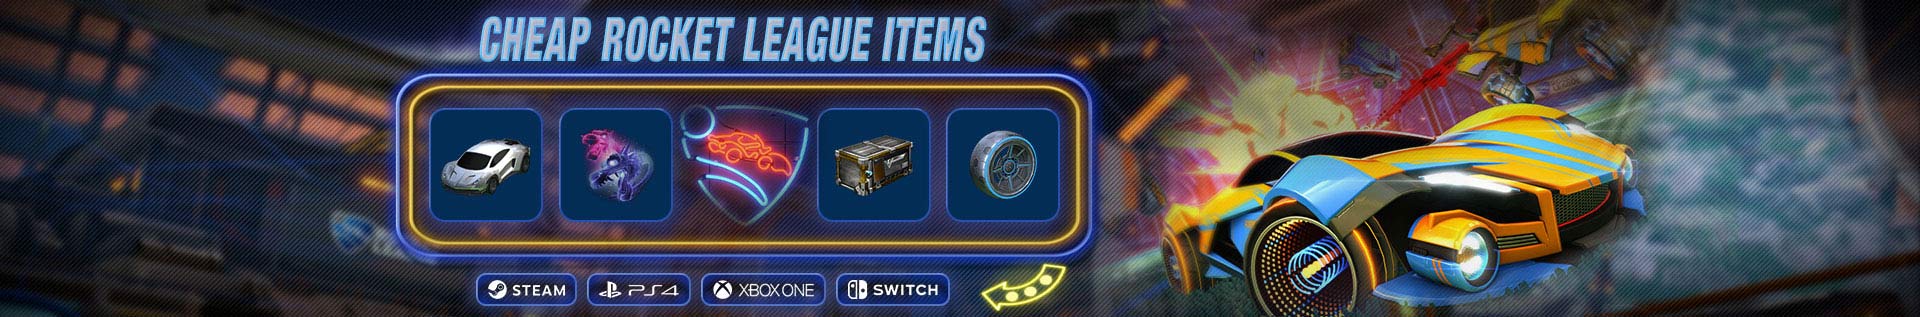 sites to buy rocket league items